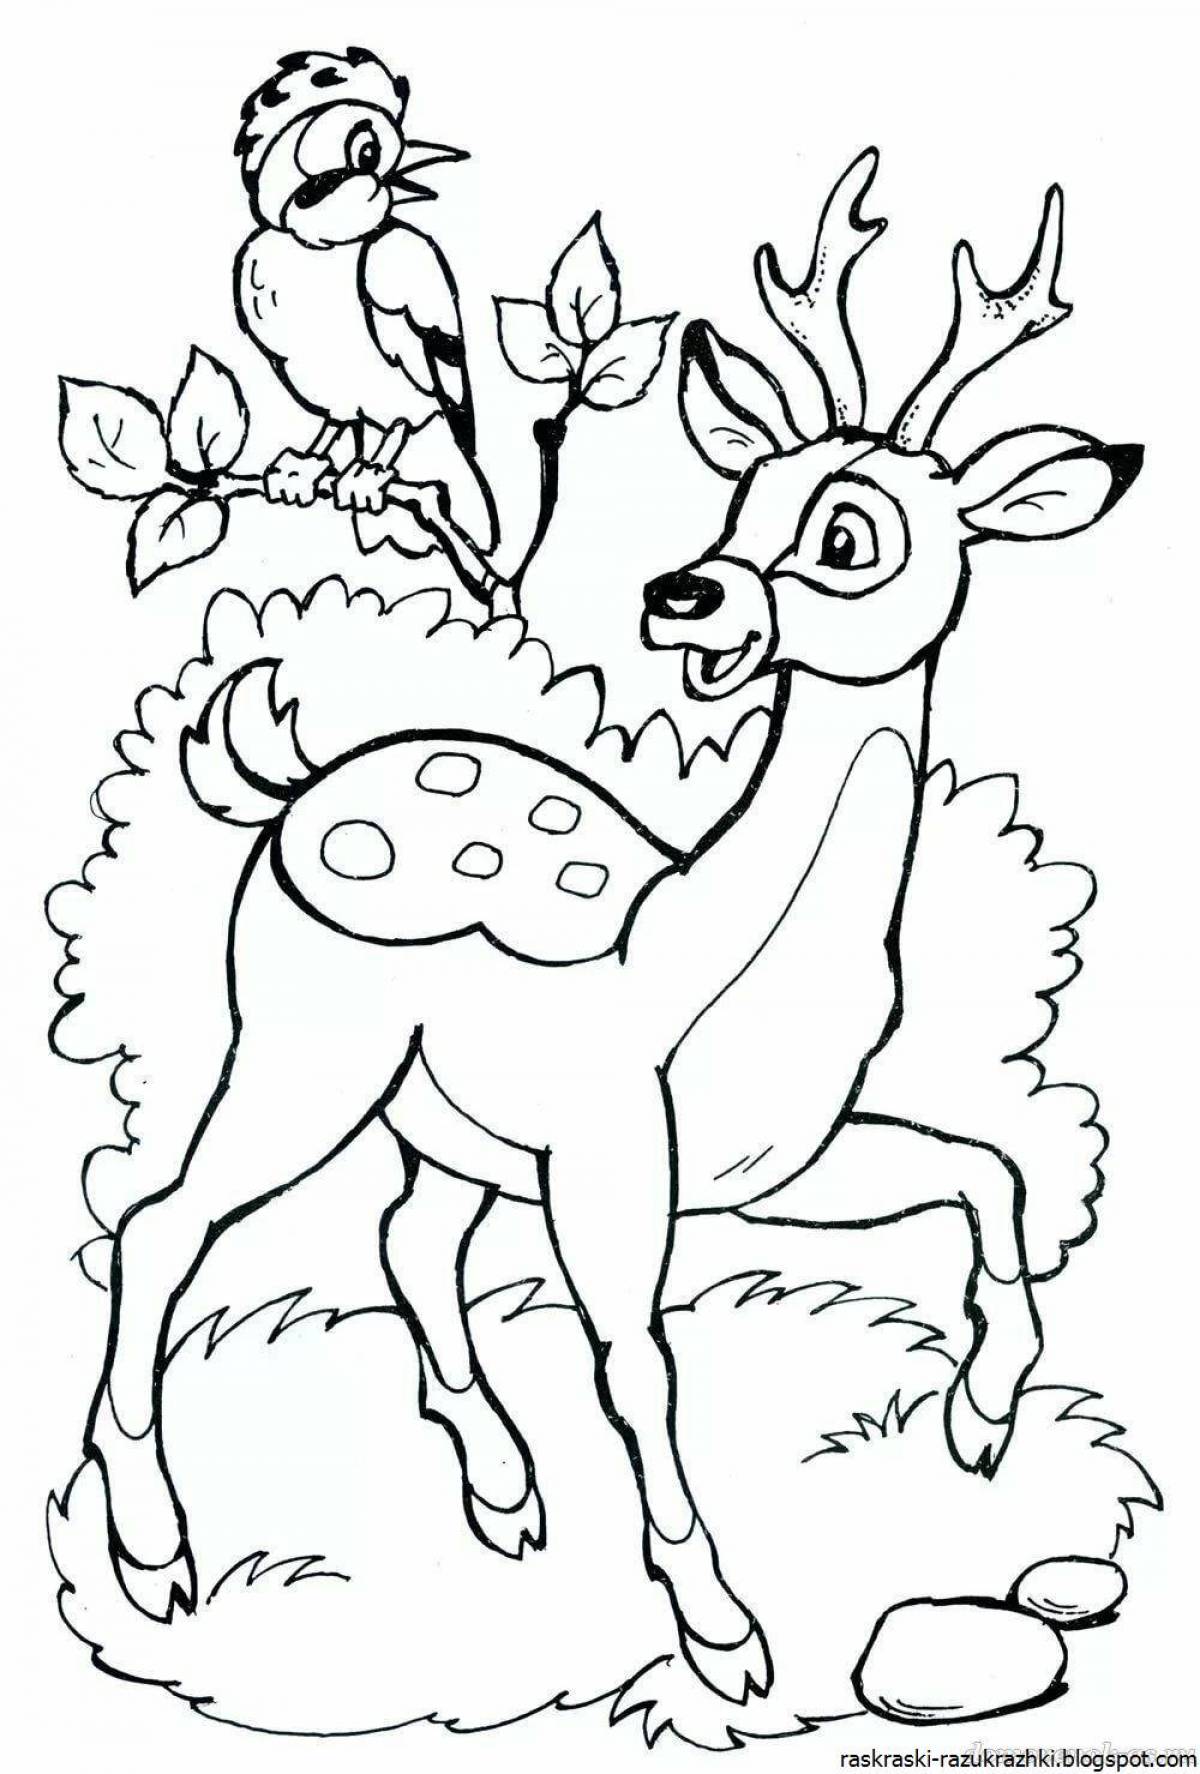 Adorable animal coloring pages for 5-7 year olds